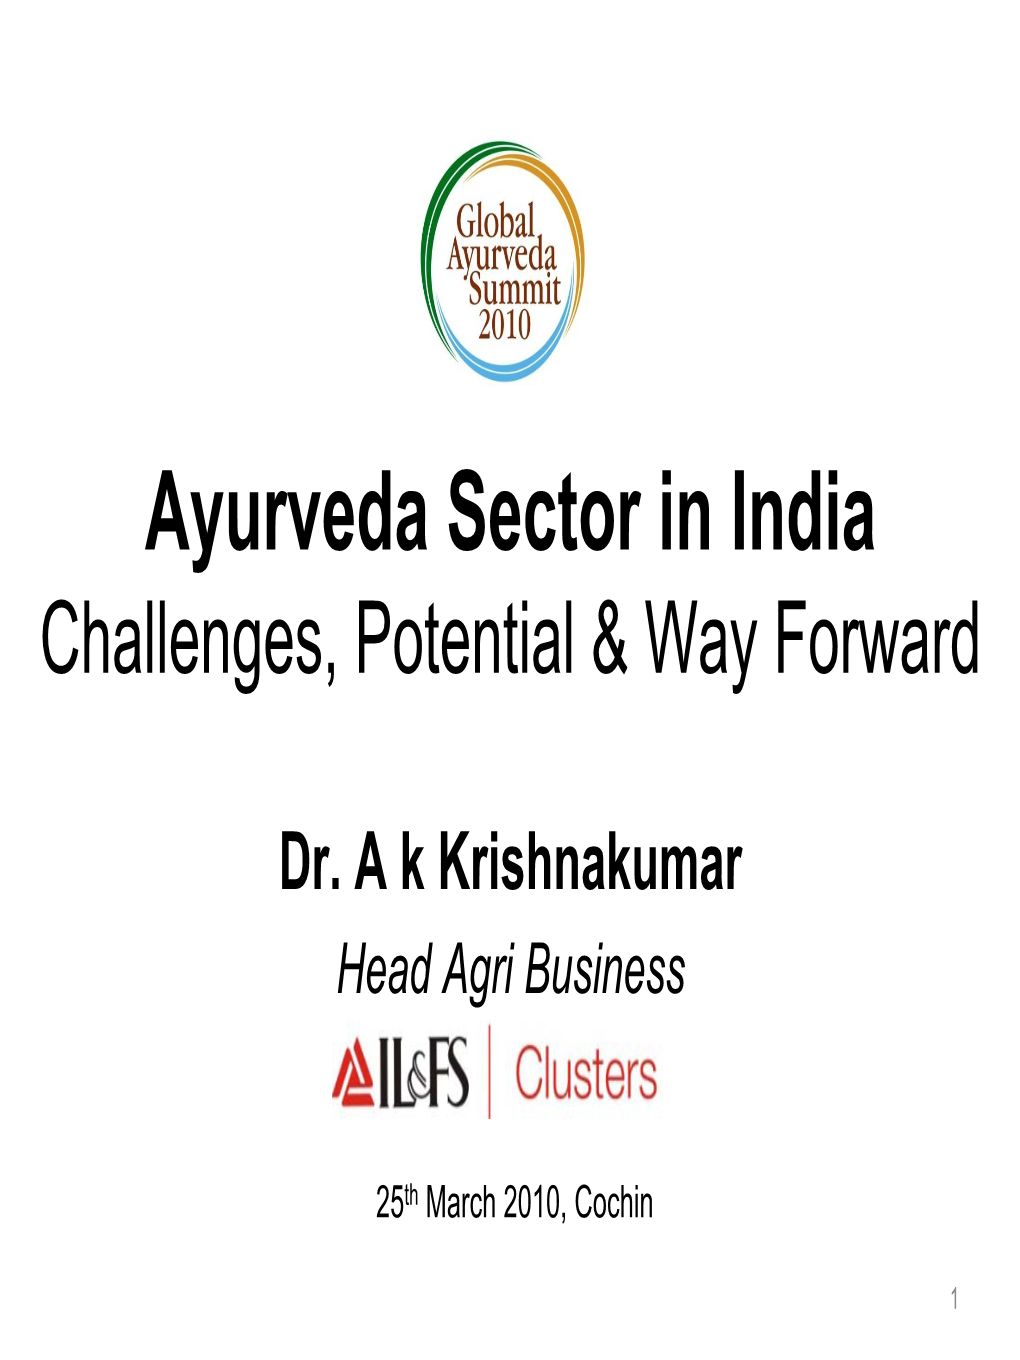 Ayurveda Sector in India Challenges, Potential & Way Forward